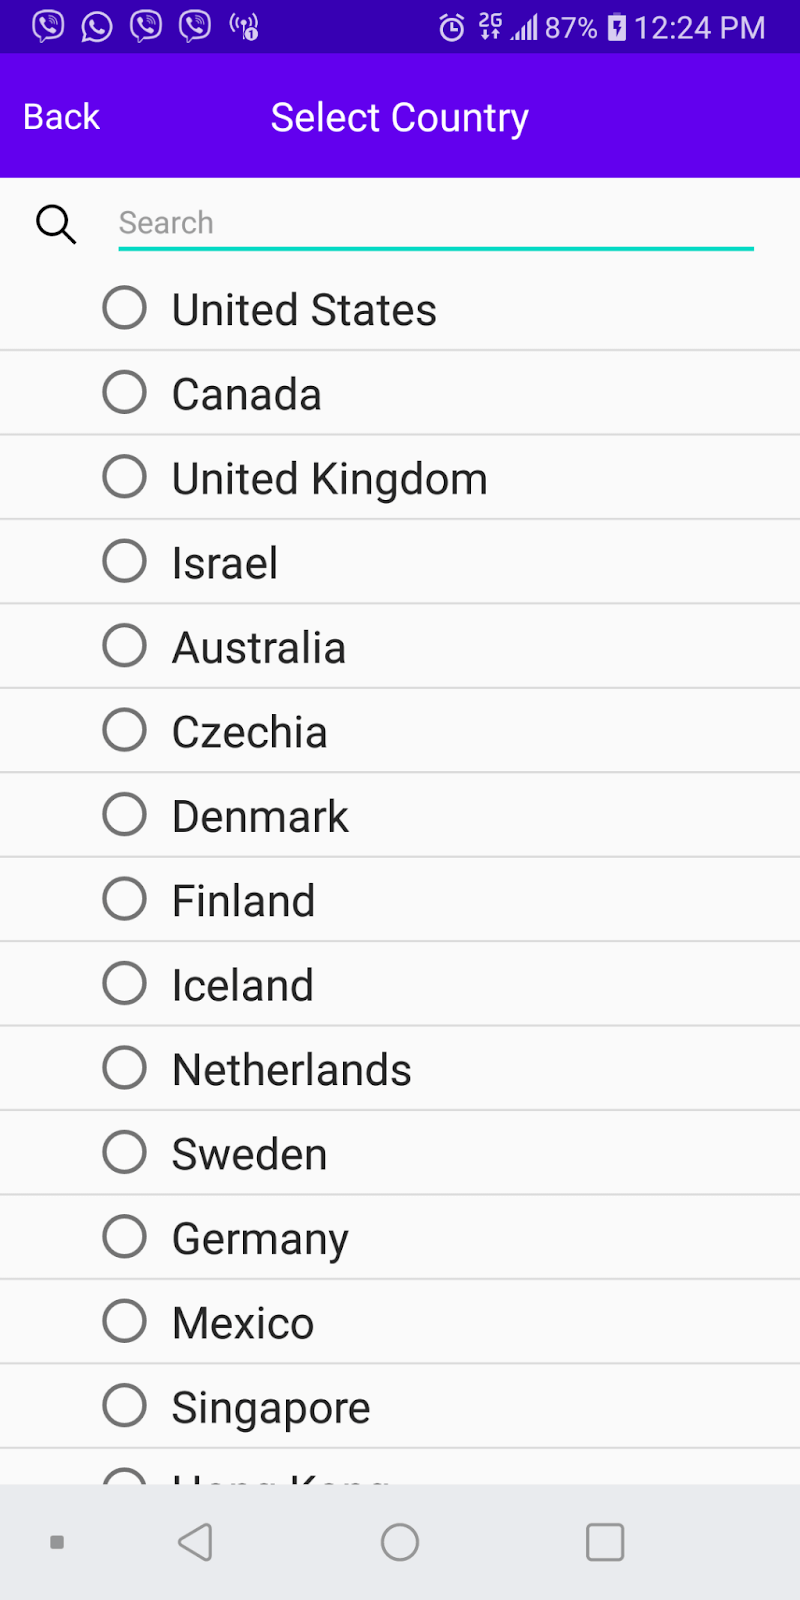 Select a country